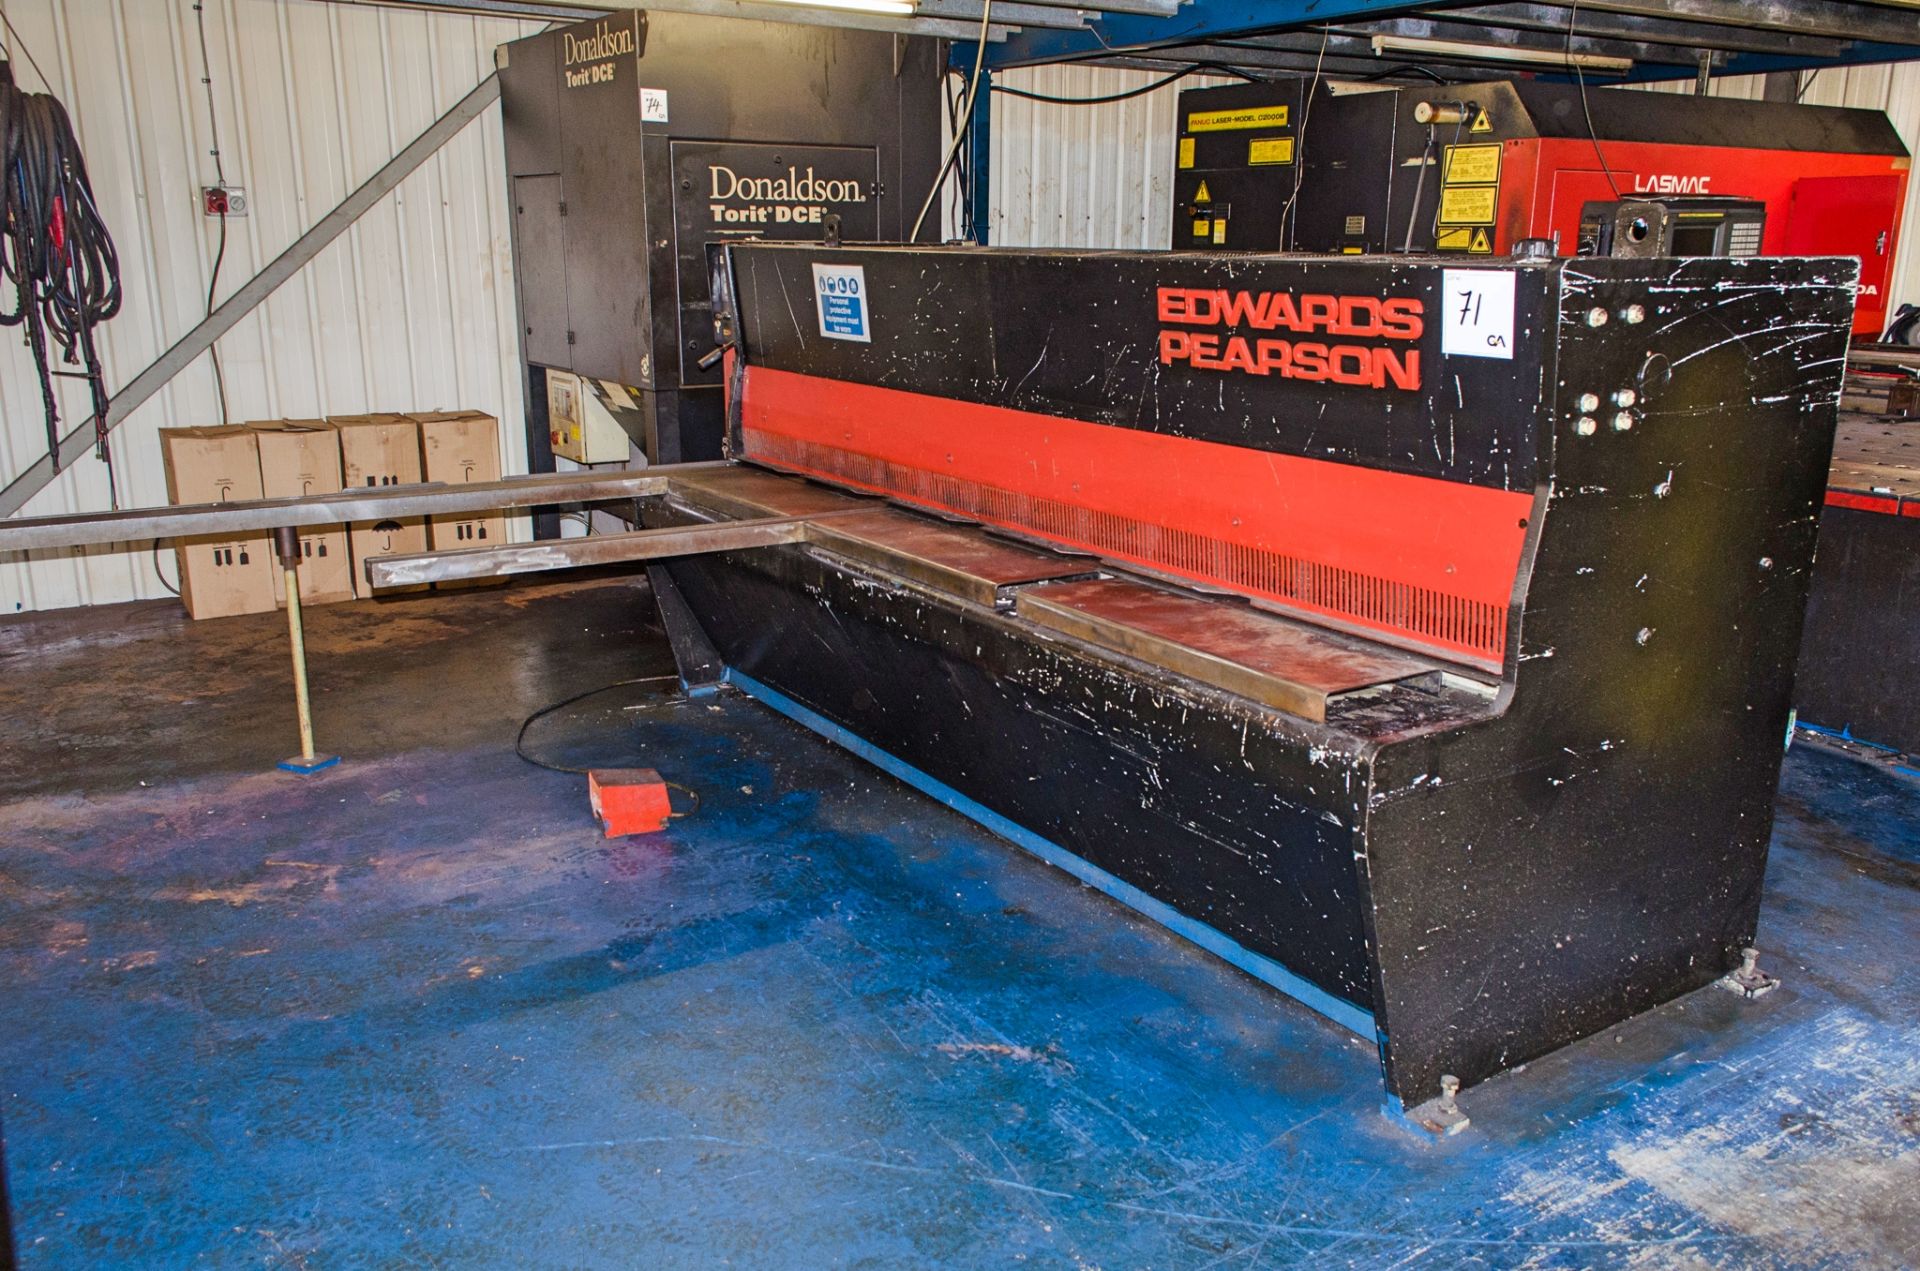 Edwards Pearson VE 3070/6.5 hydraulic guillotine S/N: 93G218